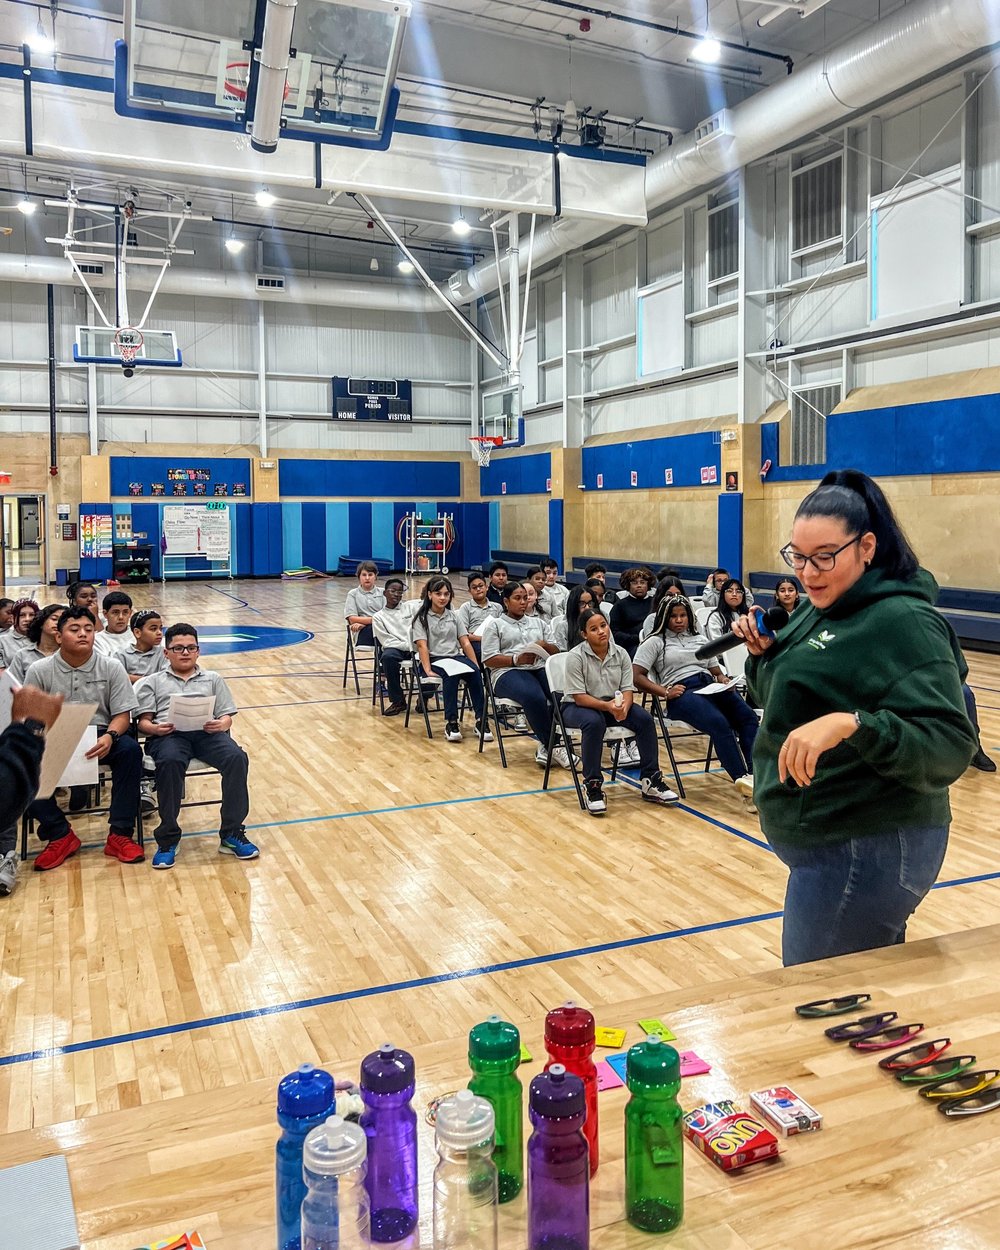  Twice a year, at our middle school auction, scholars get to buy prizes with the “prep points” they’ve earned for positive behavior. Some prizes include water bottles, accessories, pizza &amp; donut raffles, and the most popular of all - a ticket to 